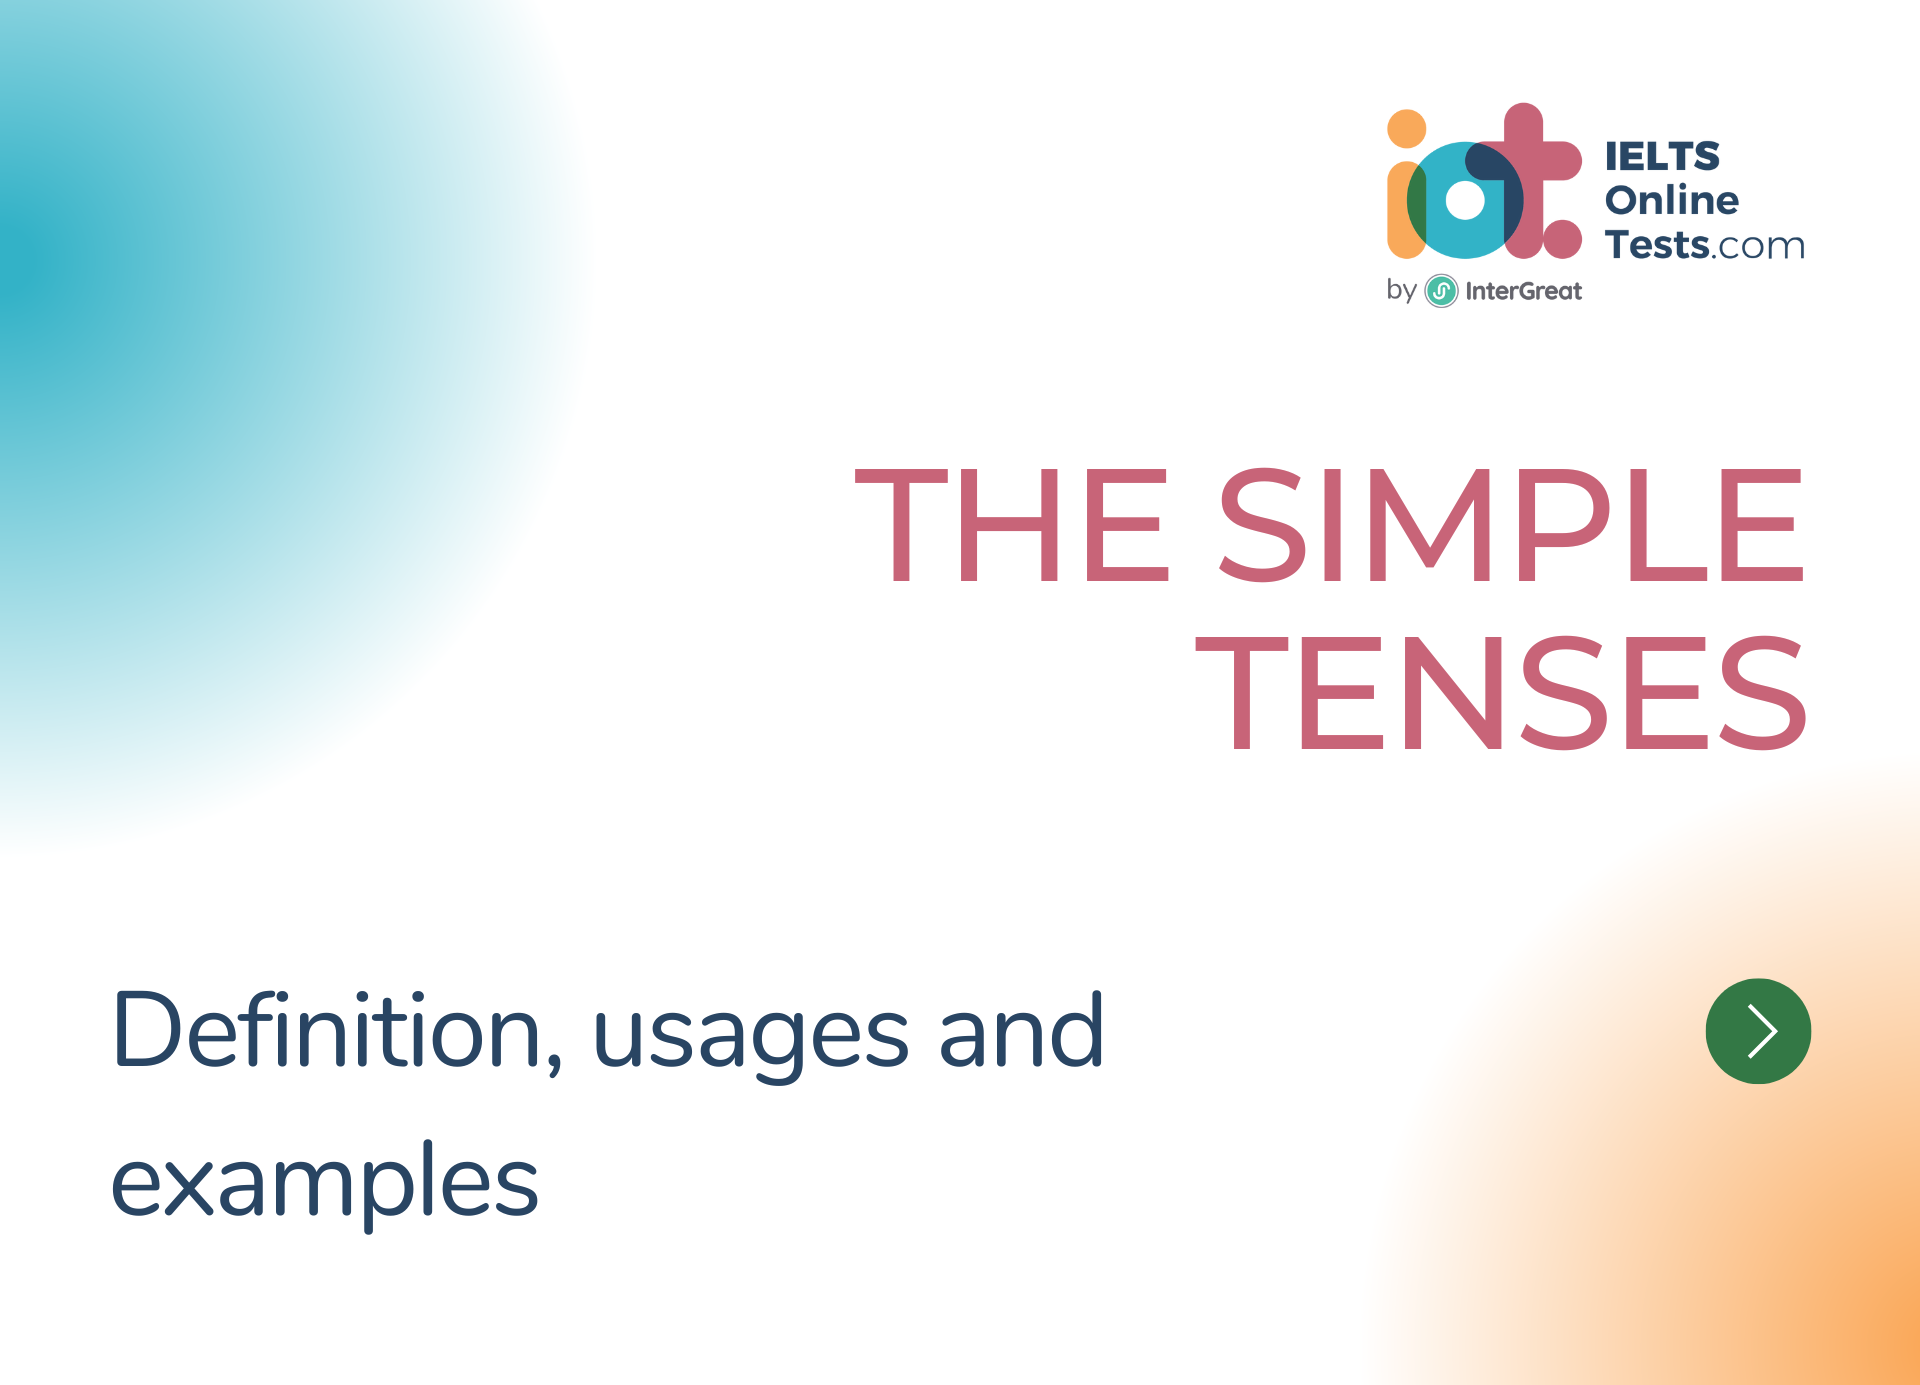 The simple tenses in English grammar